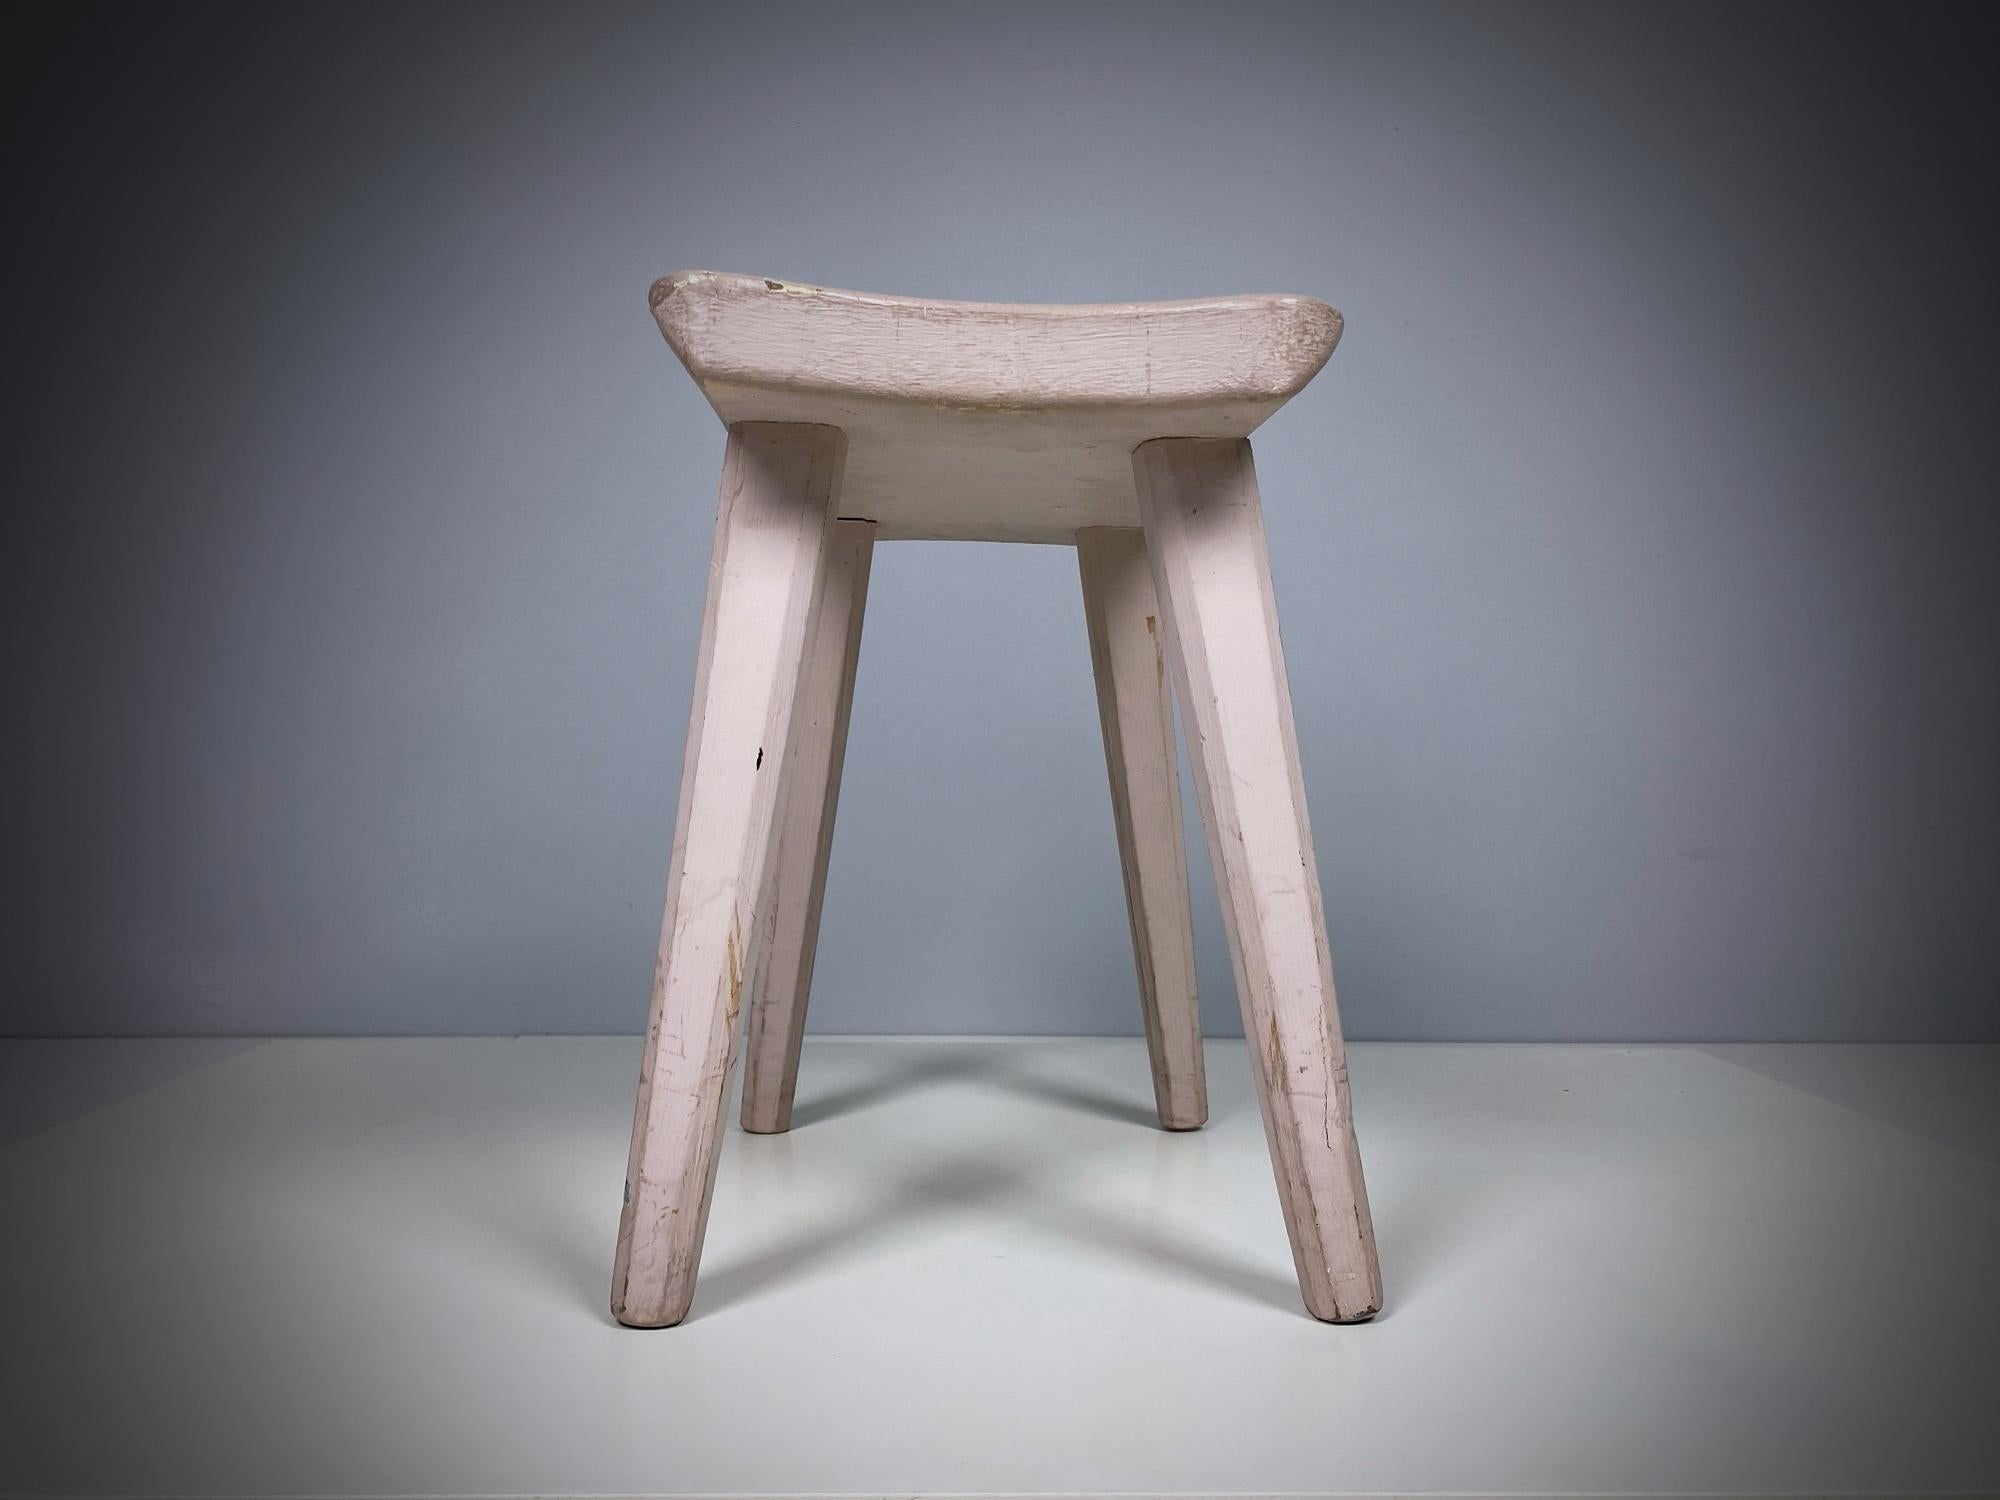 Hand-Crafted Midcentury French Artisanal Crème Oak Stool, 1950s, France For Sale